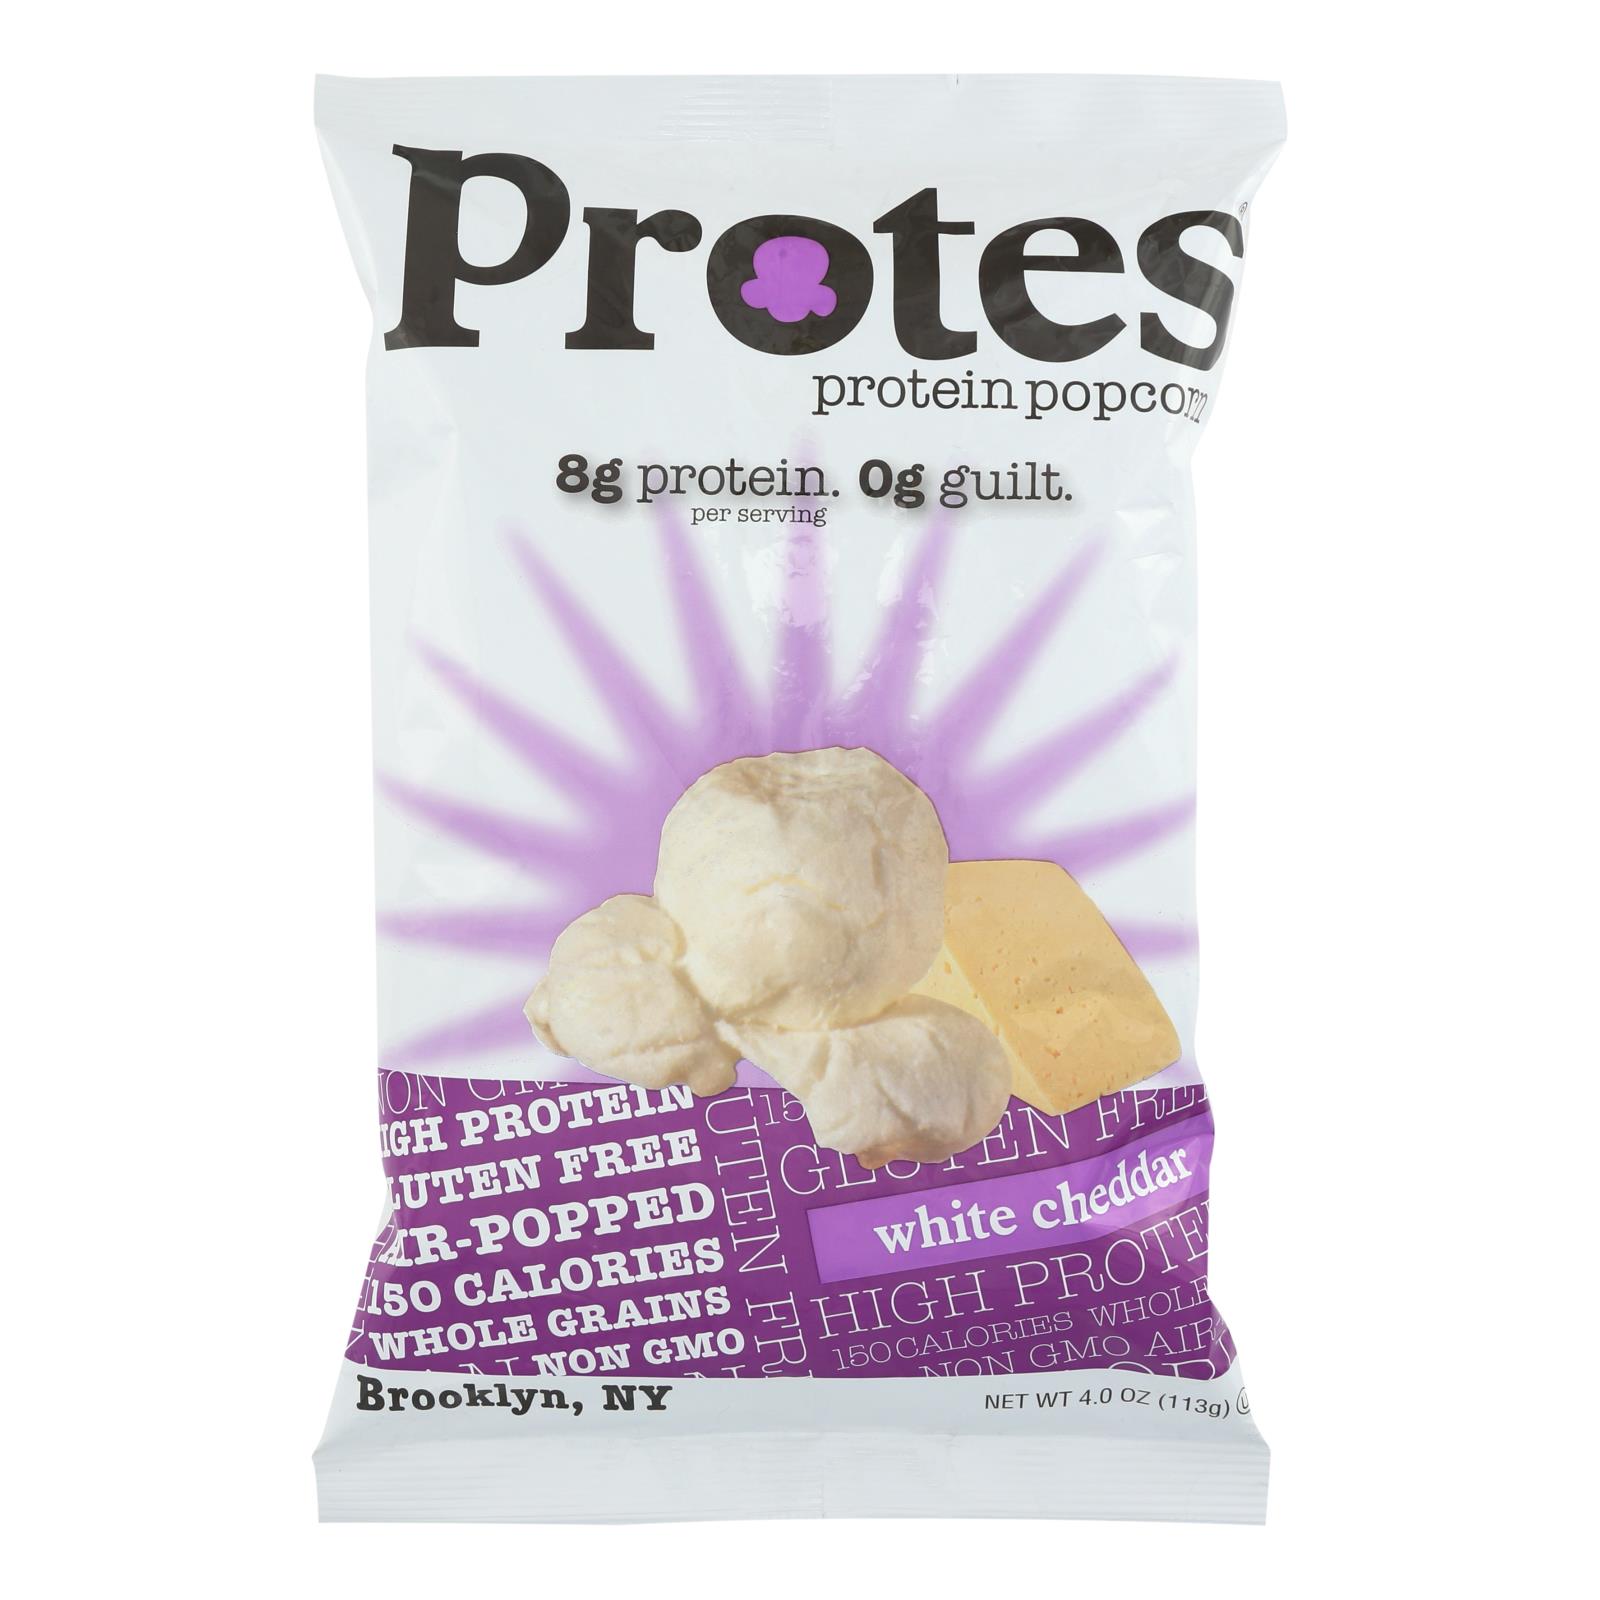 Protes Protein Chips - Popcrn Prot Wht Cheddar - Case of 12 - 4 OZ